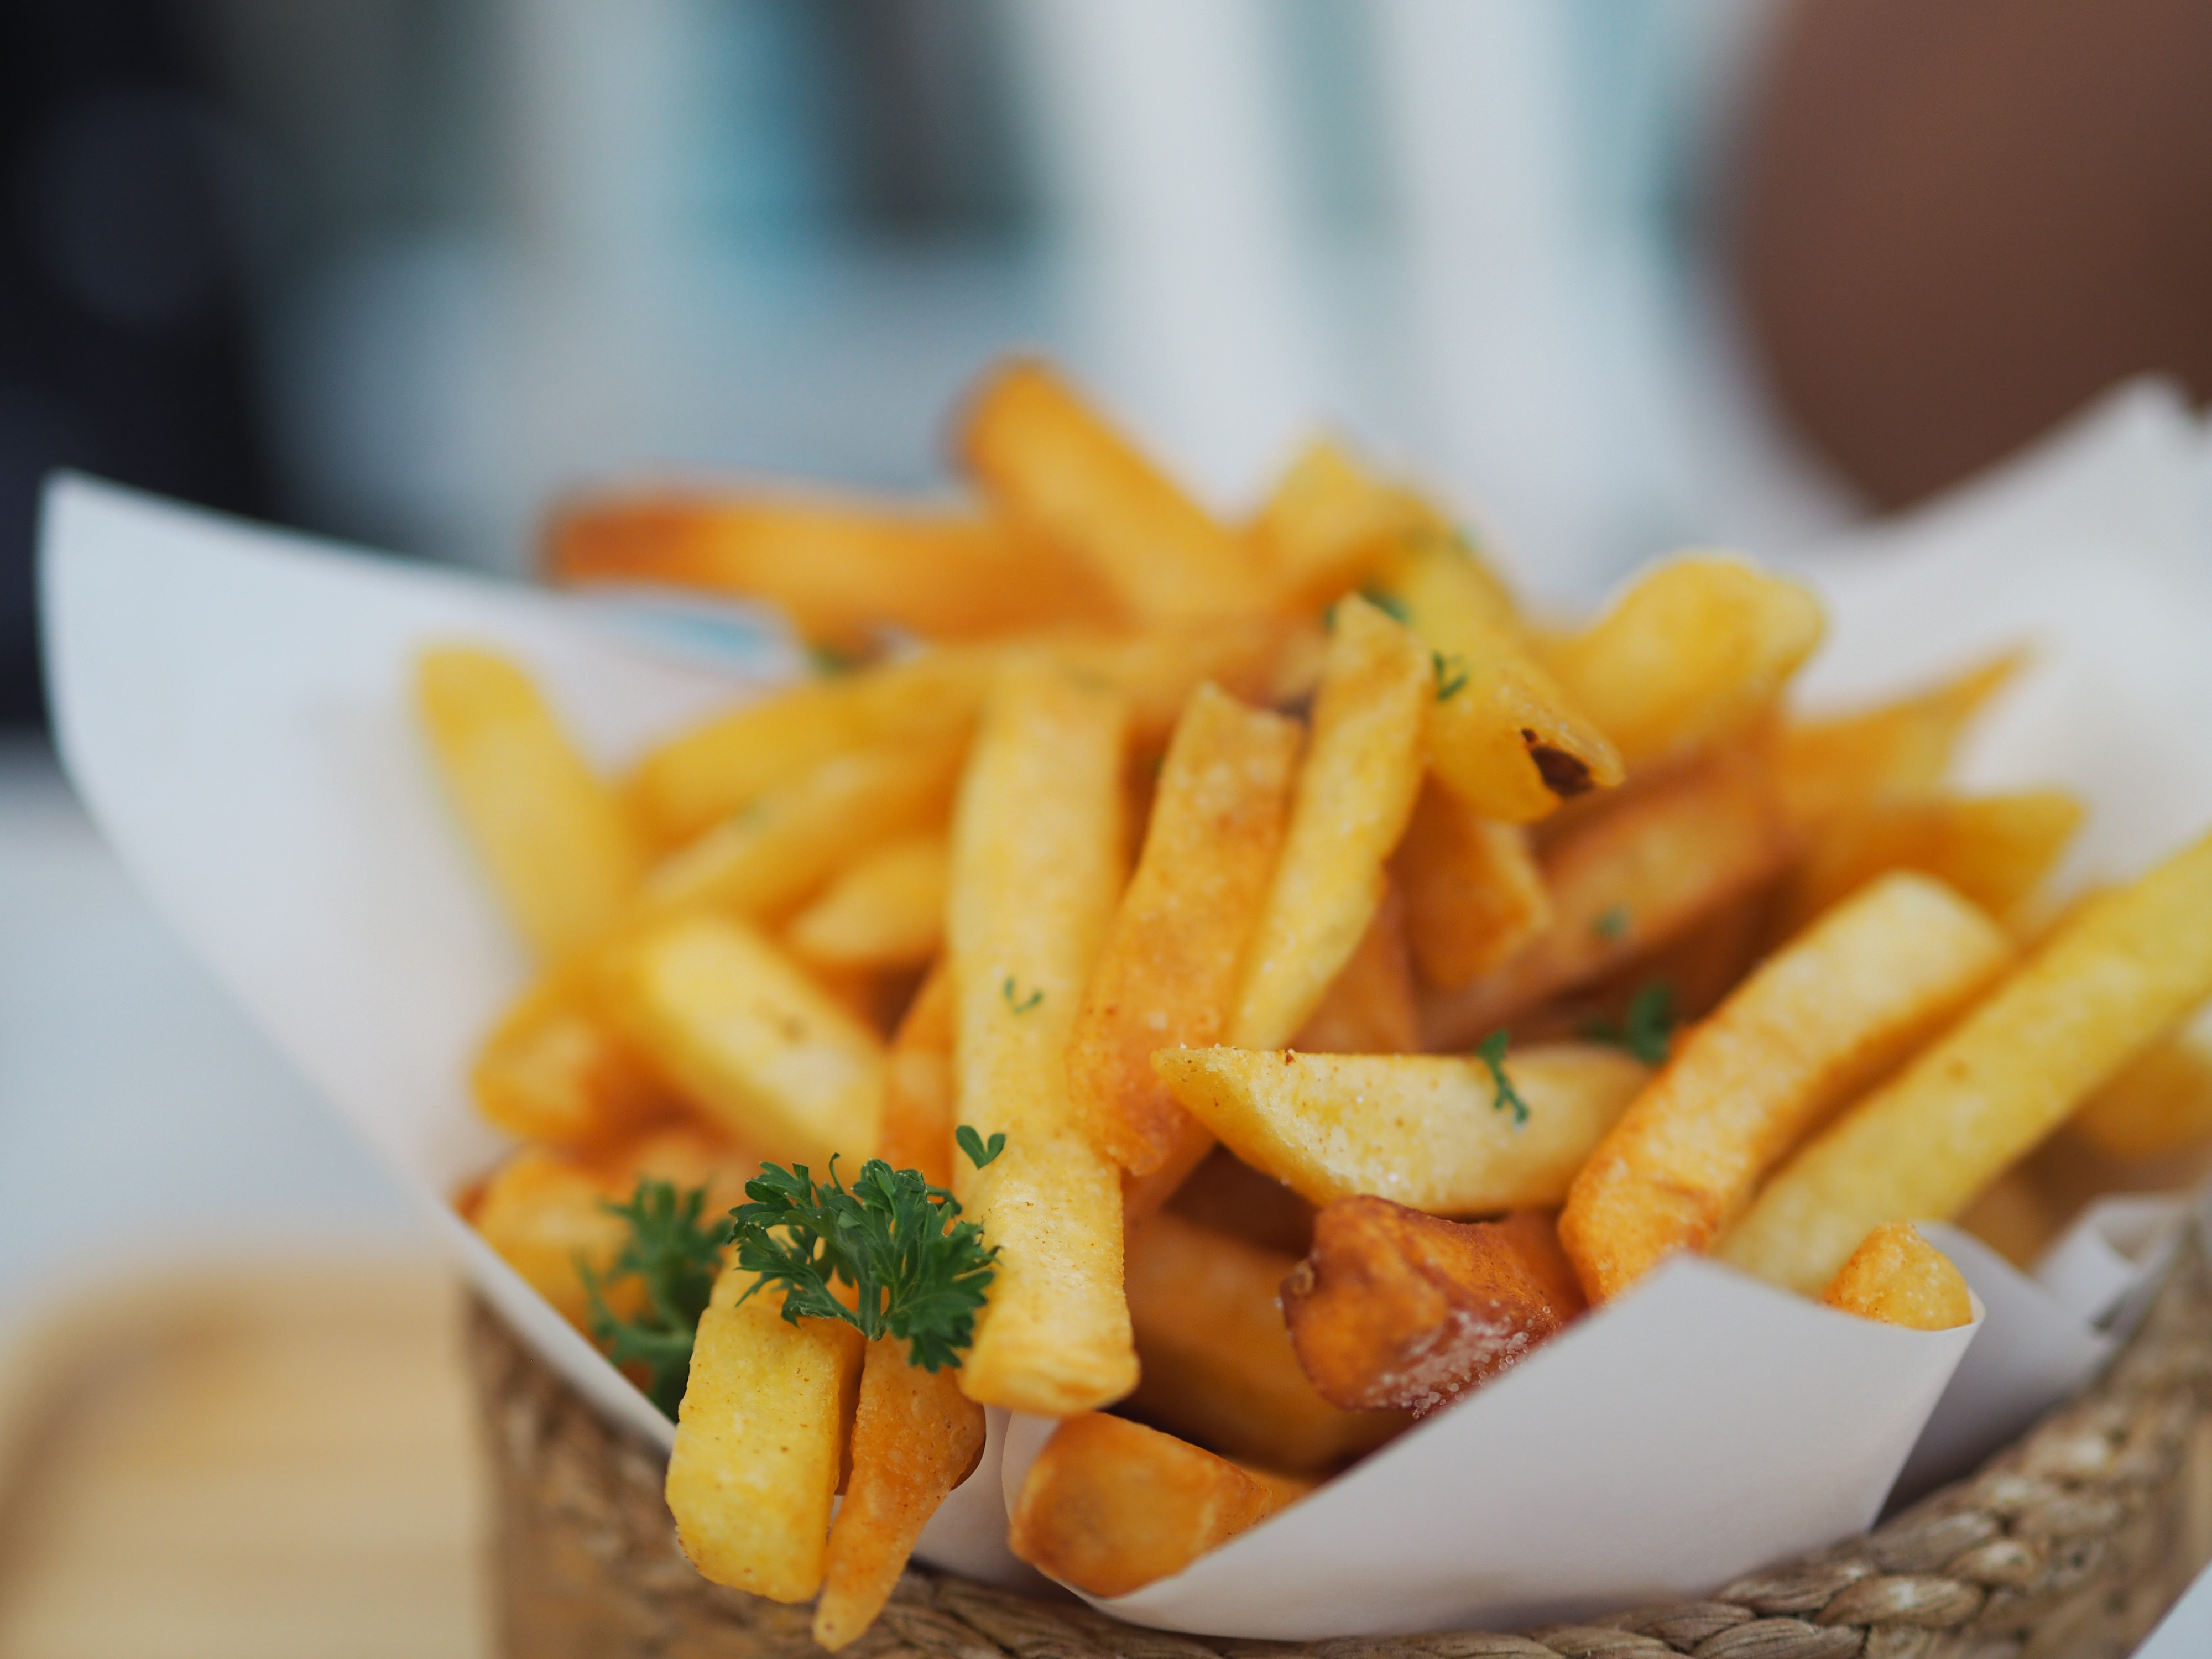 A close-up of freshly cooked French fries garnished with parsley in a paper cone